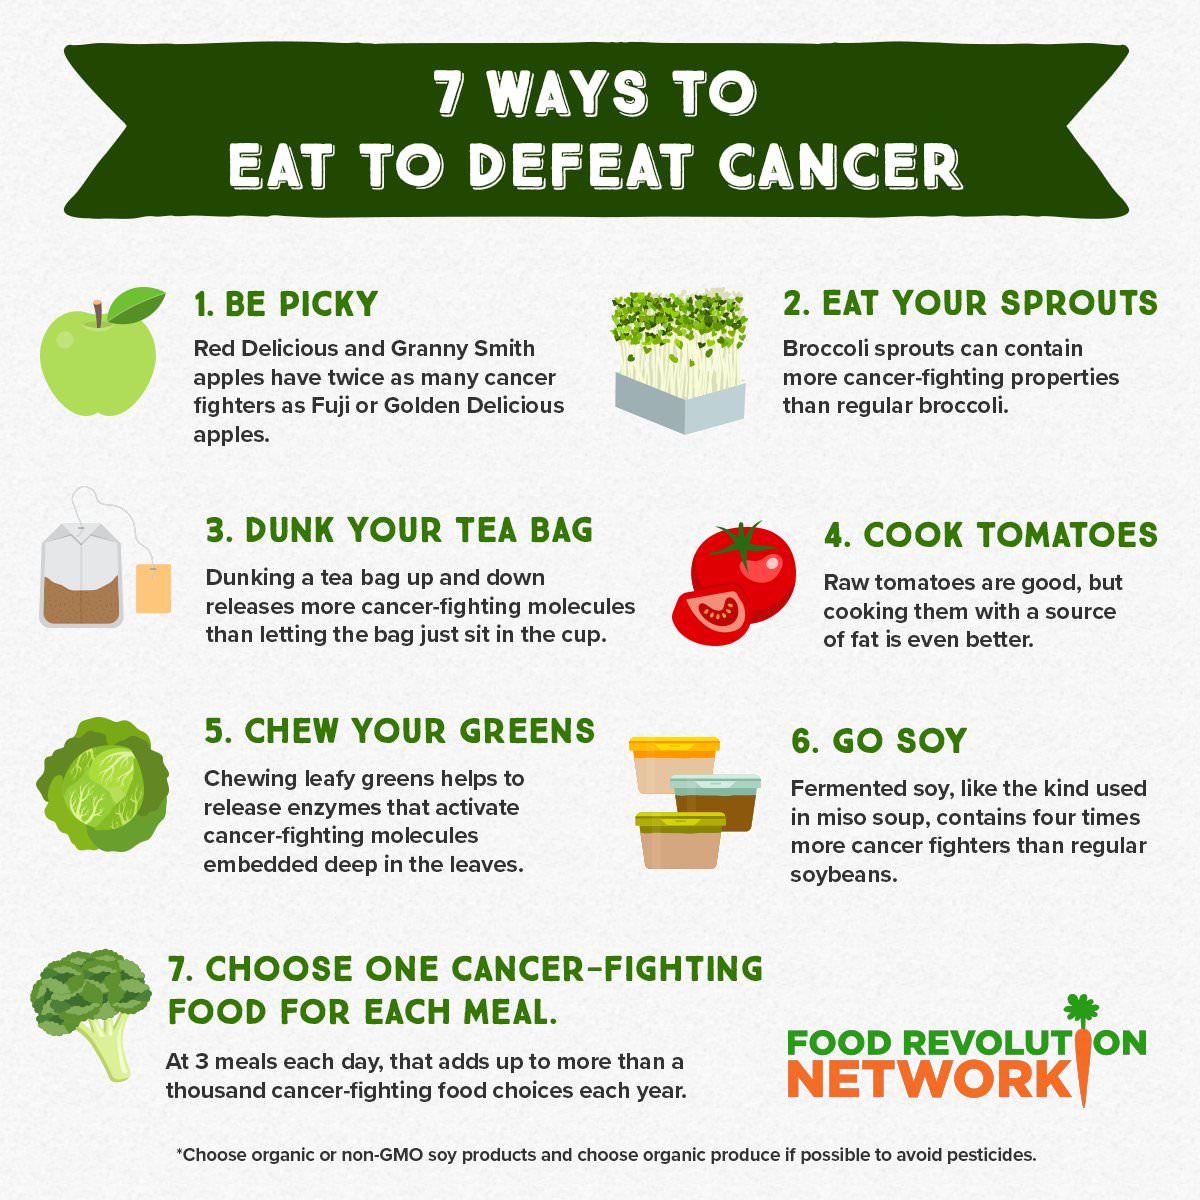 Eat to Defeat Cancer: 7 Steps for Fighting Cancer Every Day